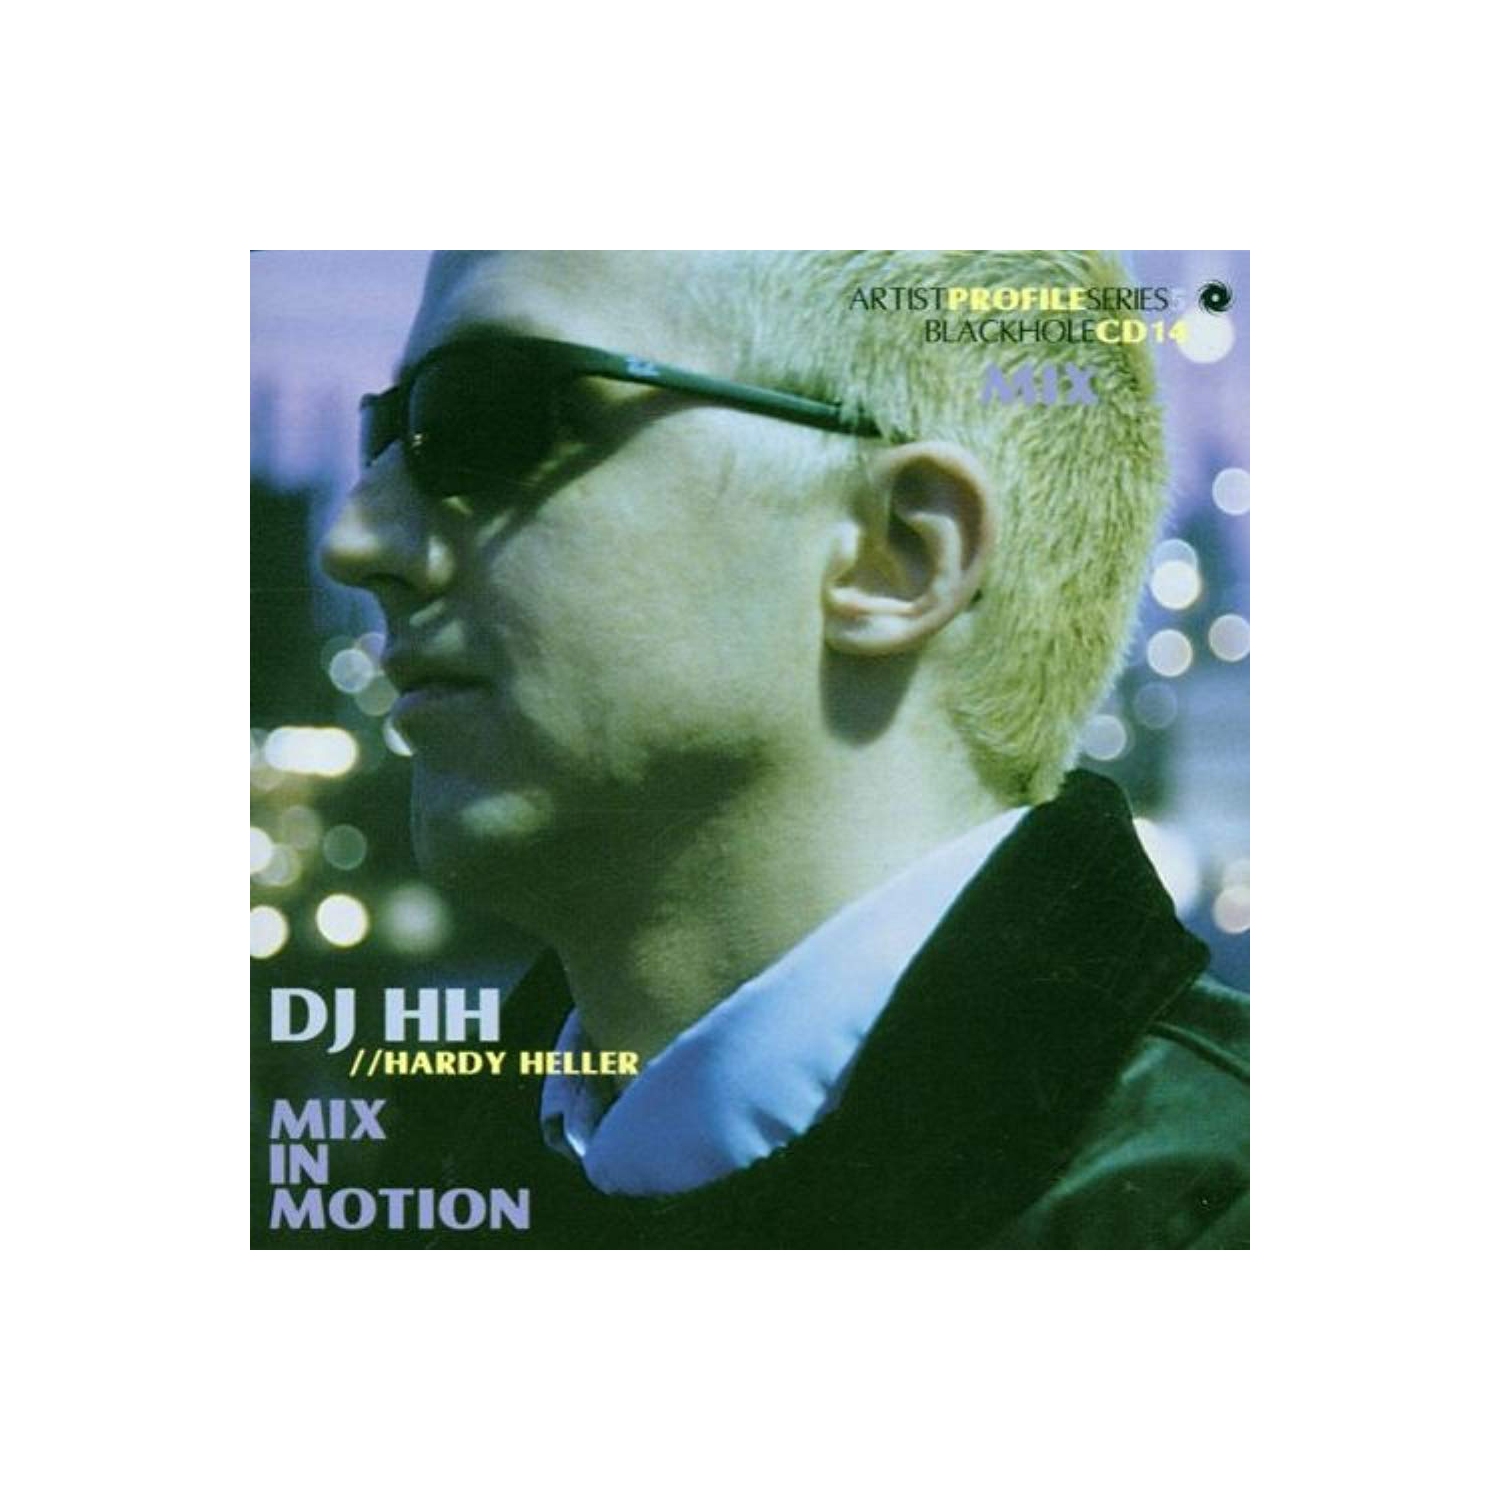 Artist Profile Series 5: Mix in Motion [Audio CD] DJ Hh and Hardy Heller